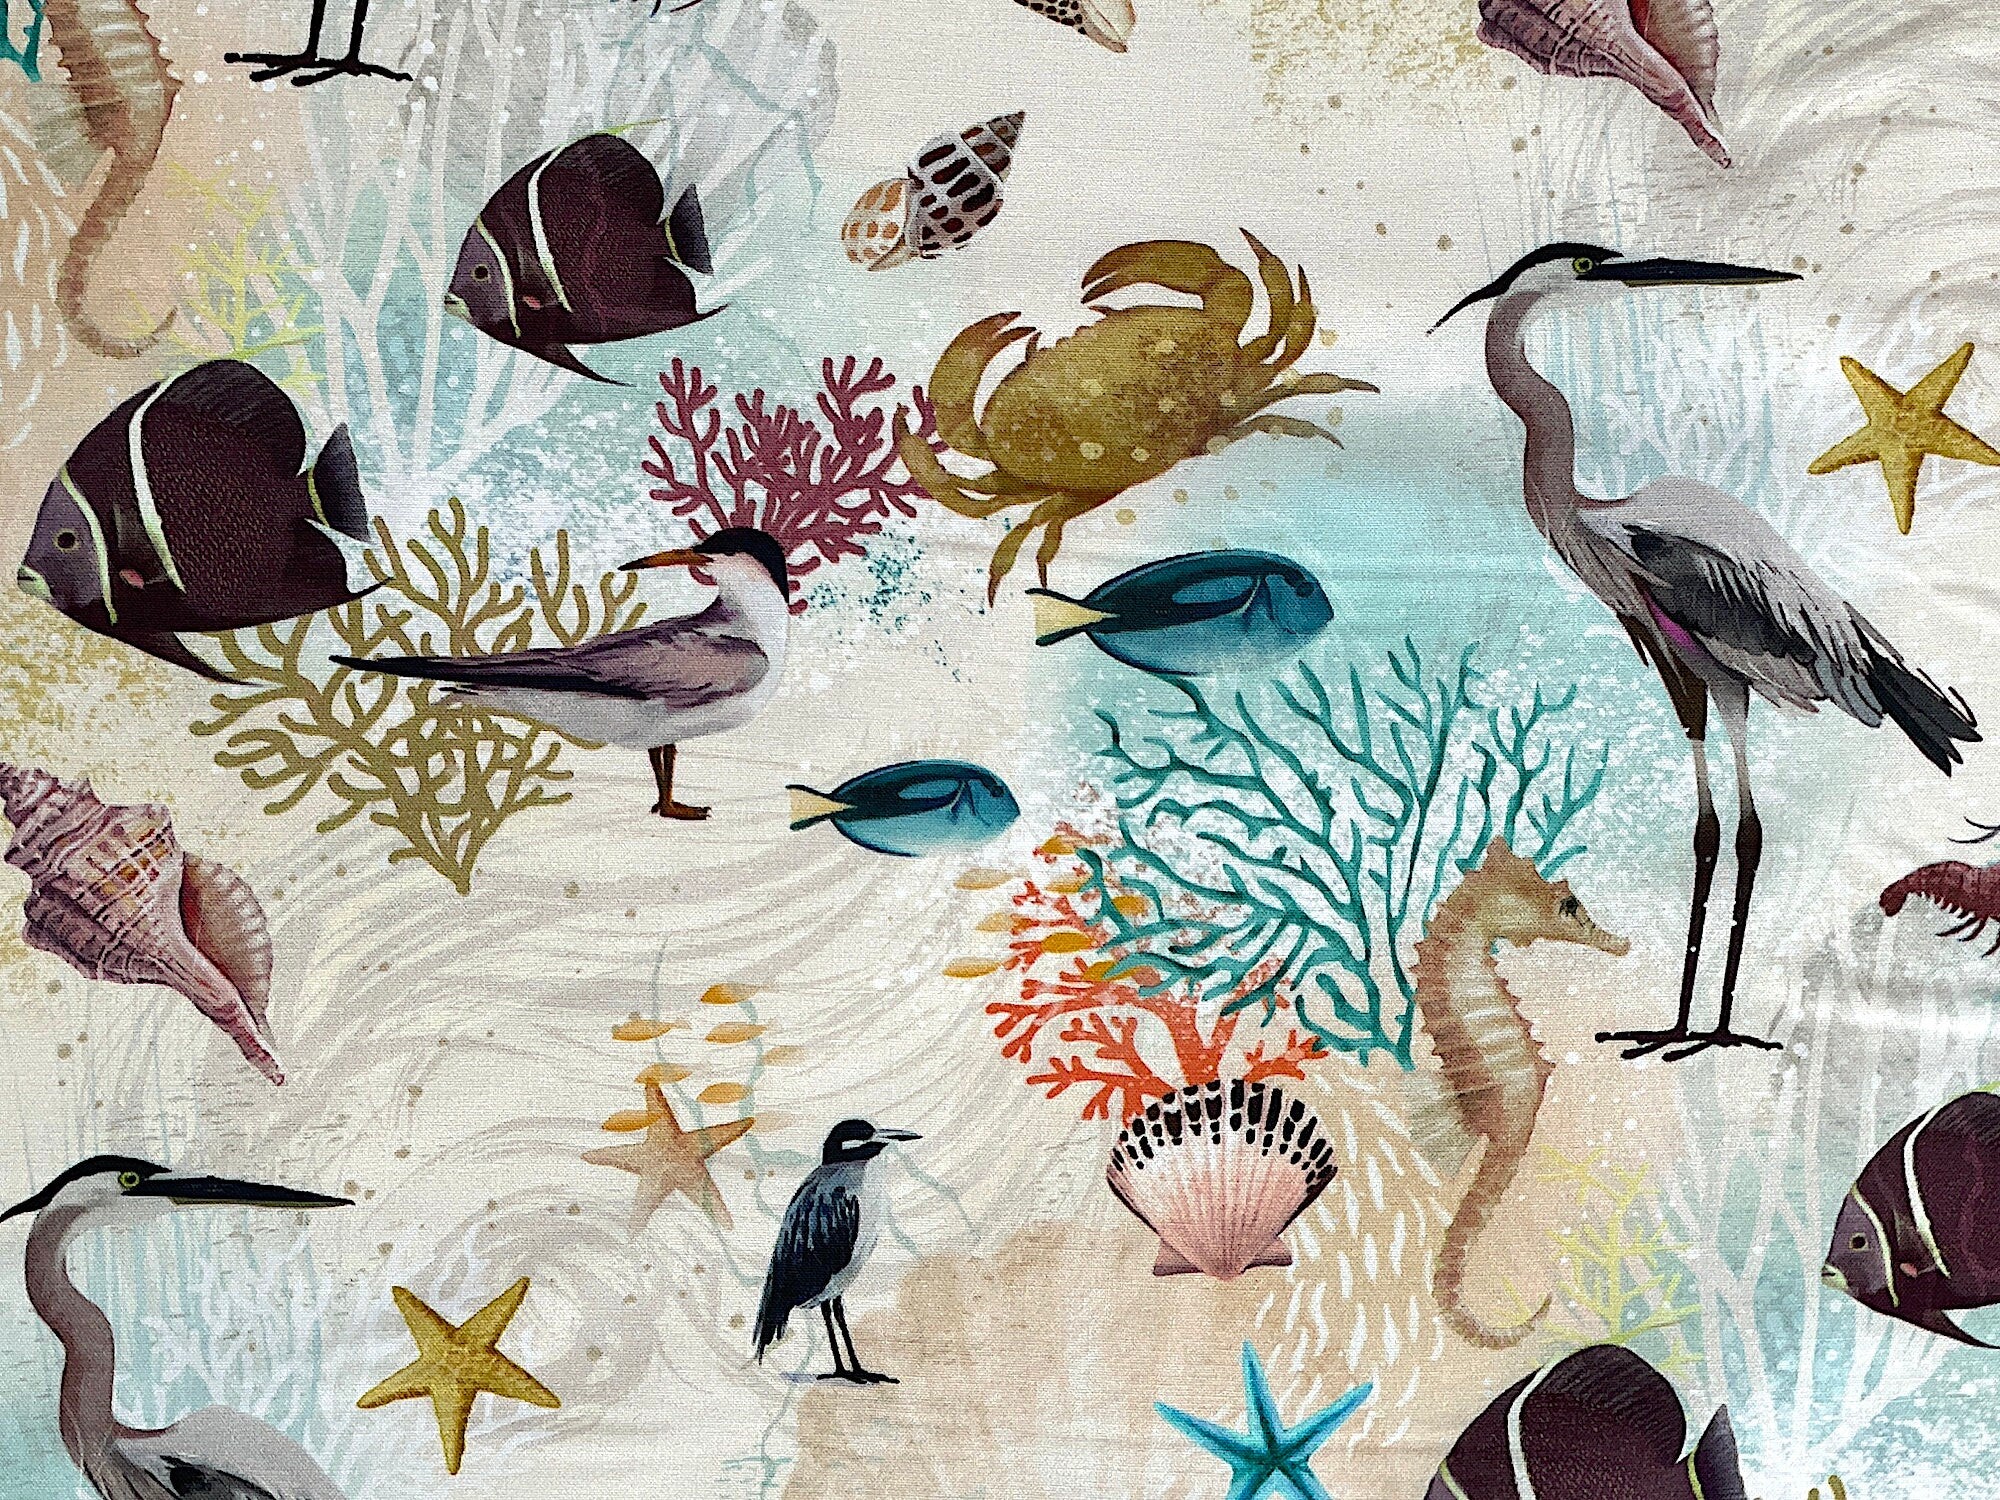 This fabric is called Sealife and is covered with fish, seashells, ocean plants, birds, seahorses, starfish and more. This fabric is part of the Seashell Wishes collection.